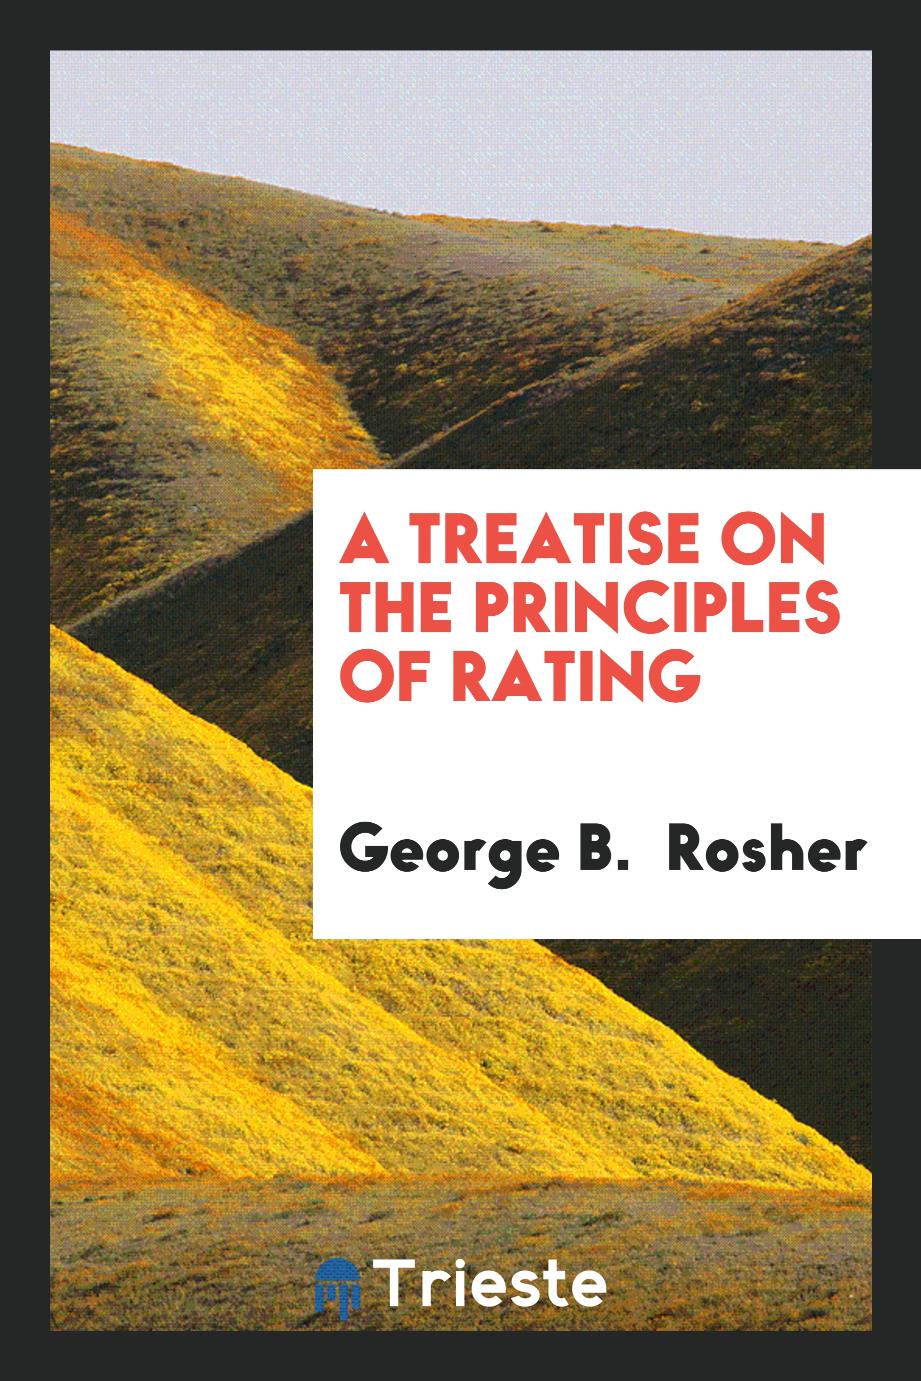 A Treatise on the Principles of Rating